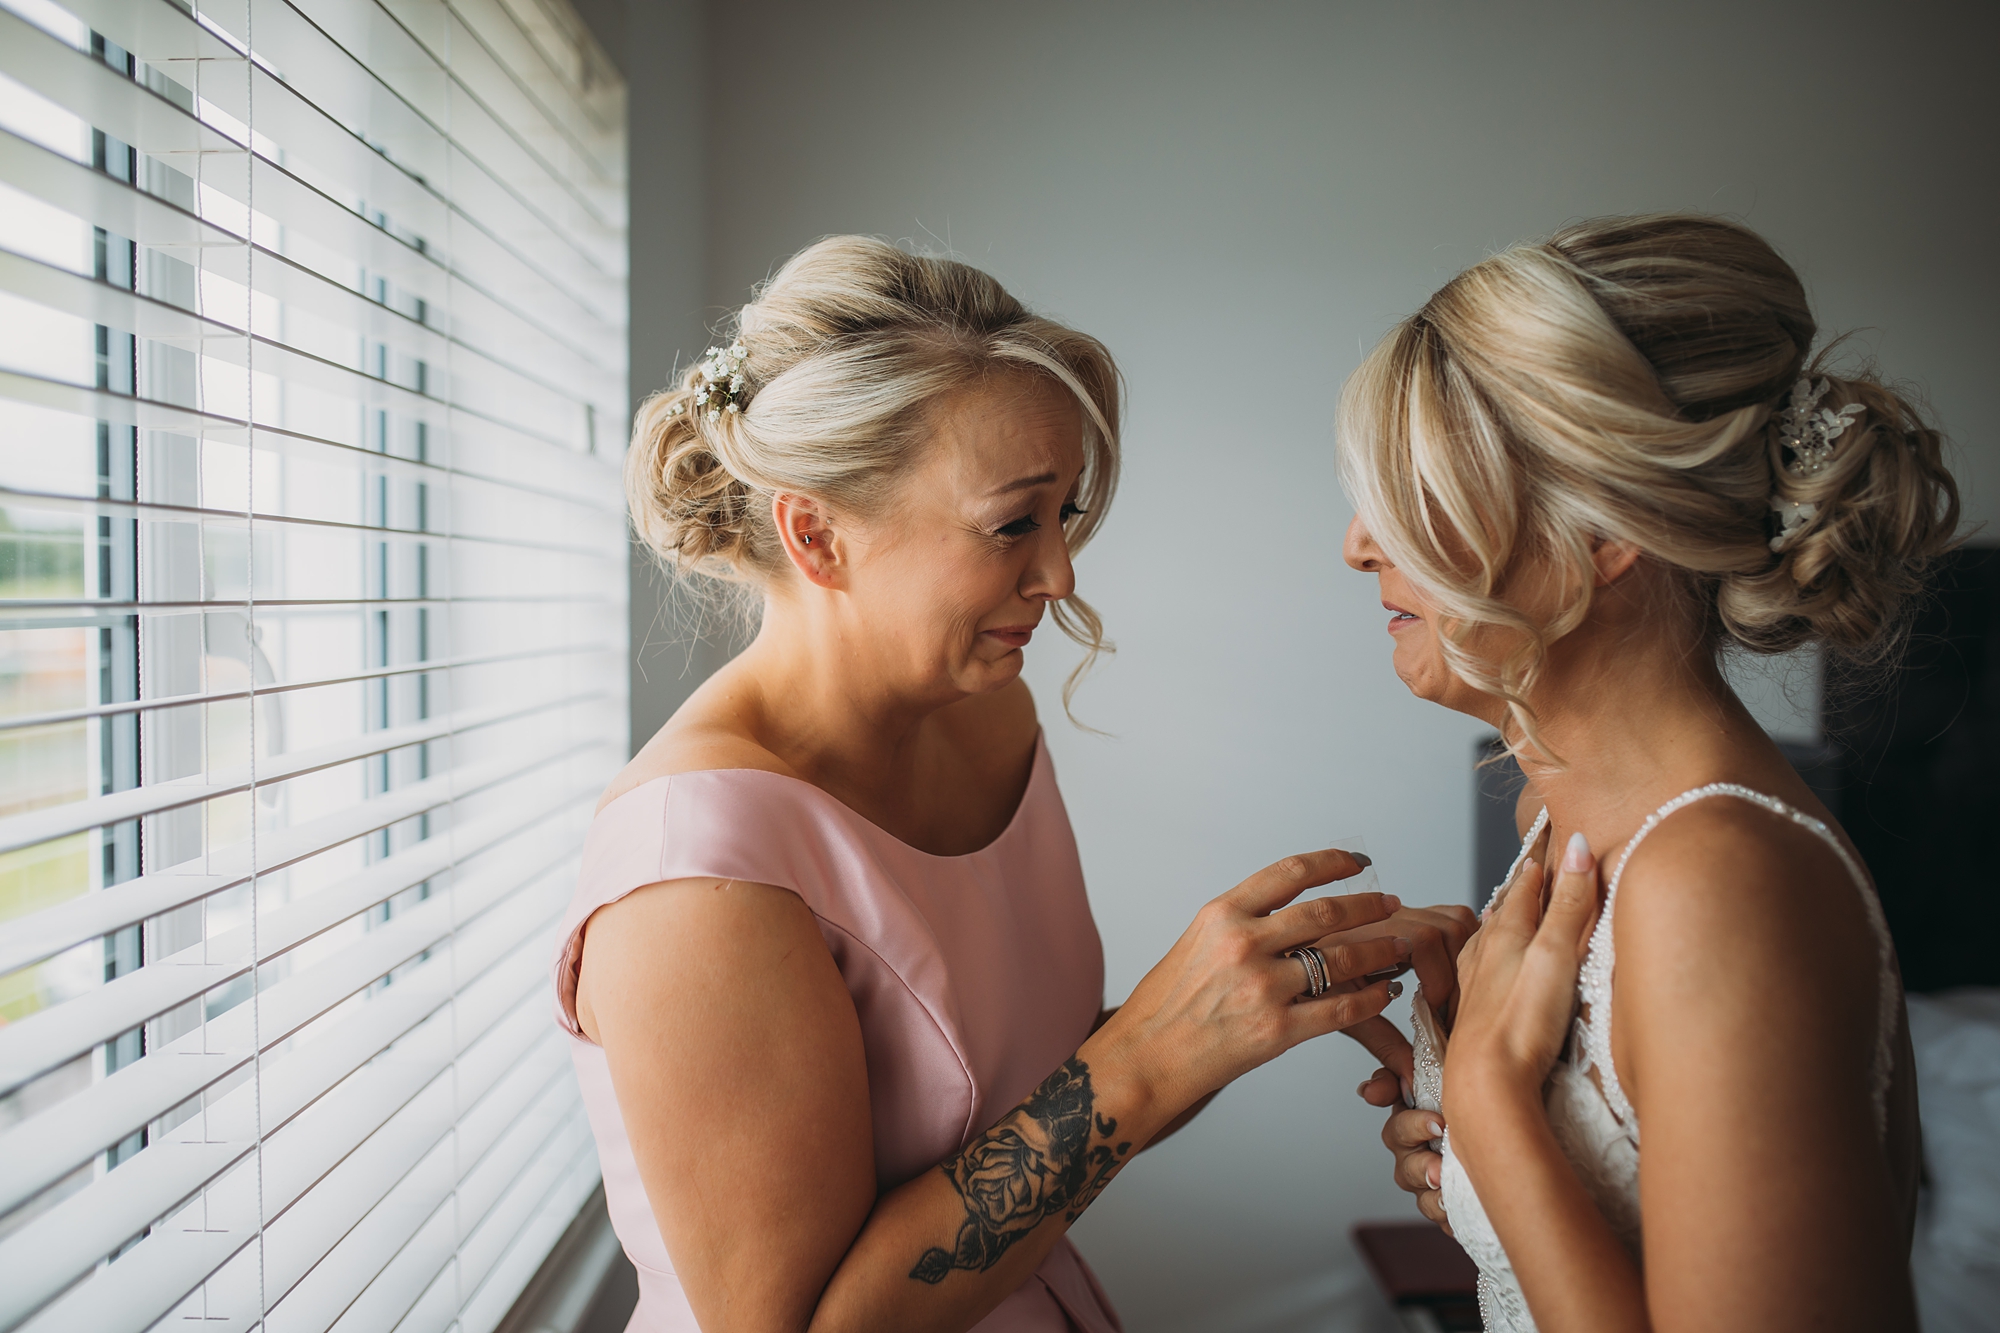 best wedding photographs of a bride and her bridesmaid crying together with happiness